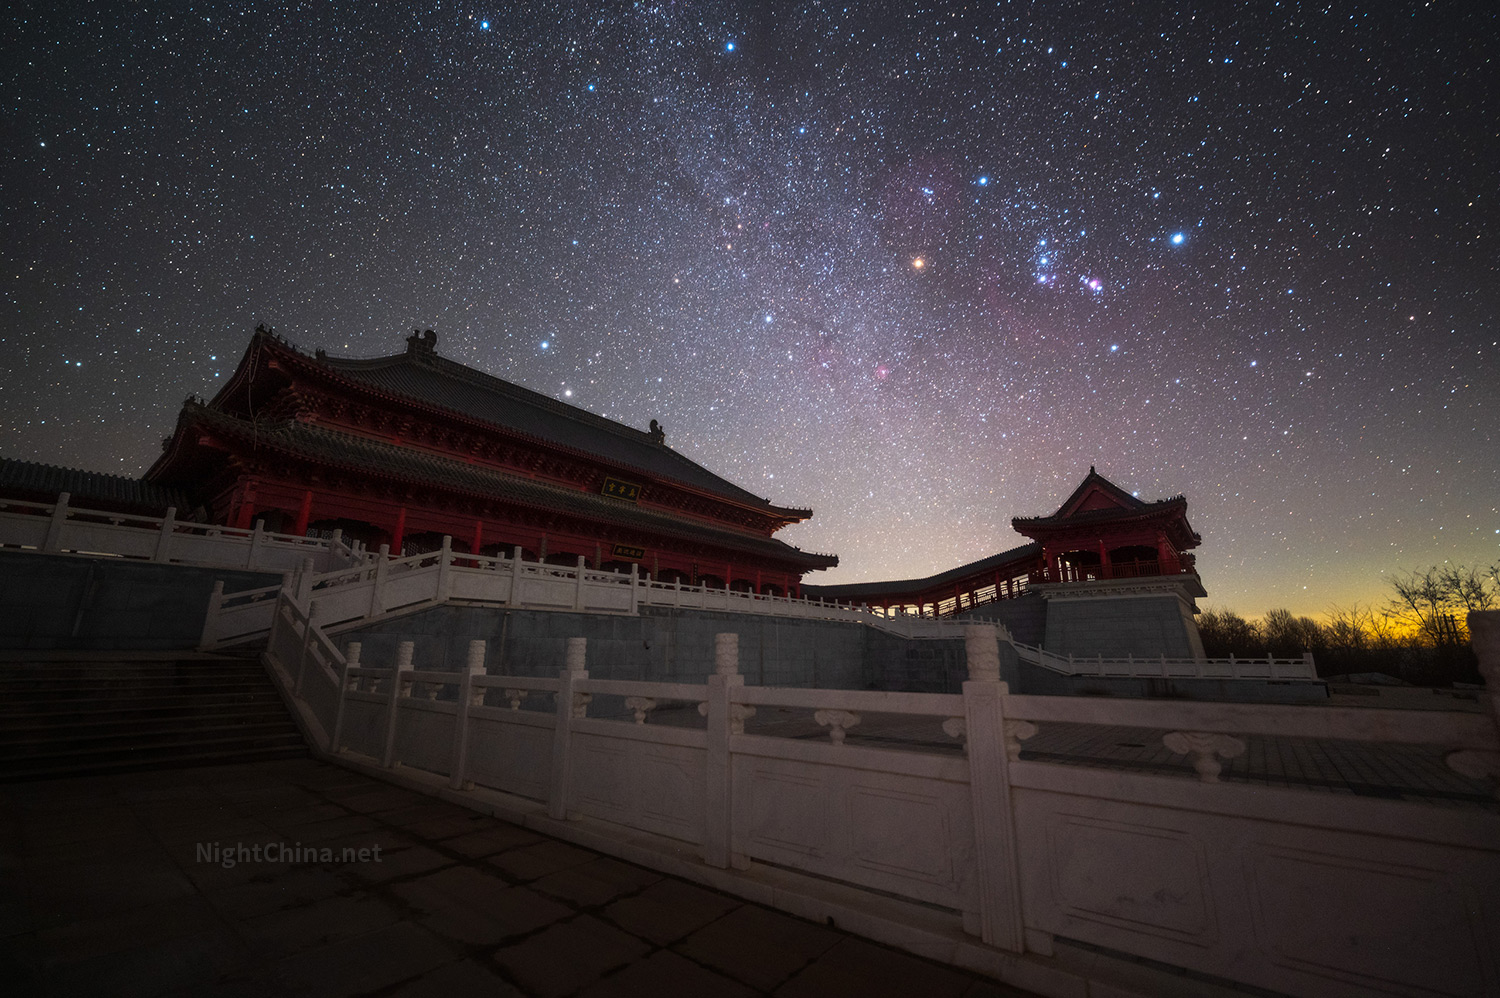 Star trails over Forbidden City, Beijing | Today's Image | EarthSky